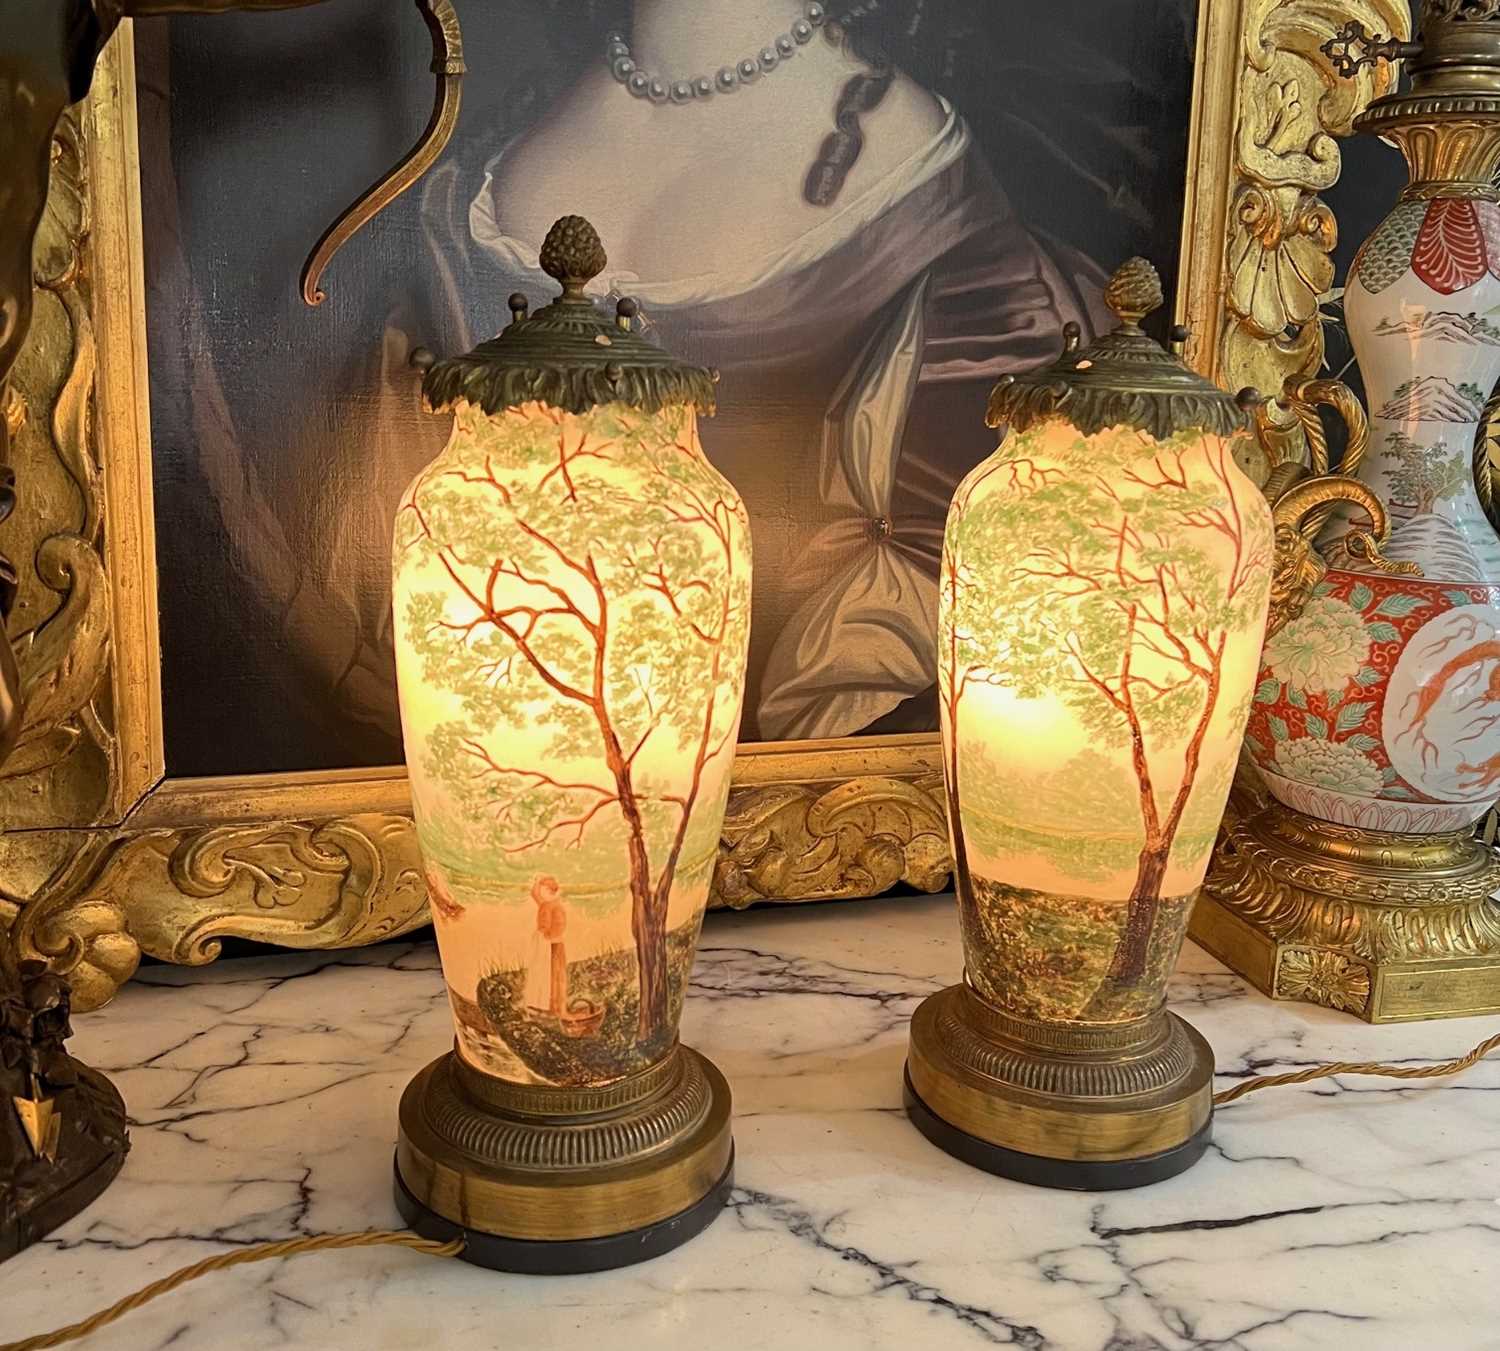 A PAIR OF LATE 19TH / EARLY 20TH CENTURY FRENCH ART GLASS LAMPS - Image 3 of 7